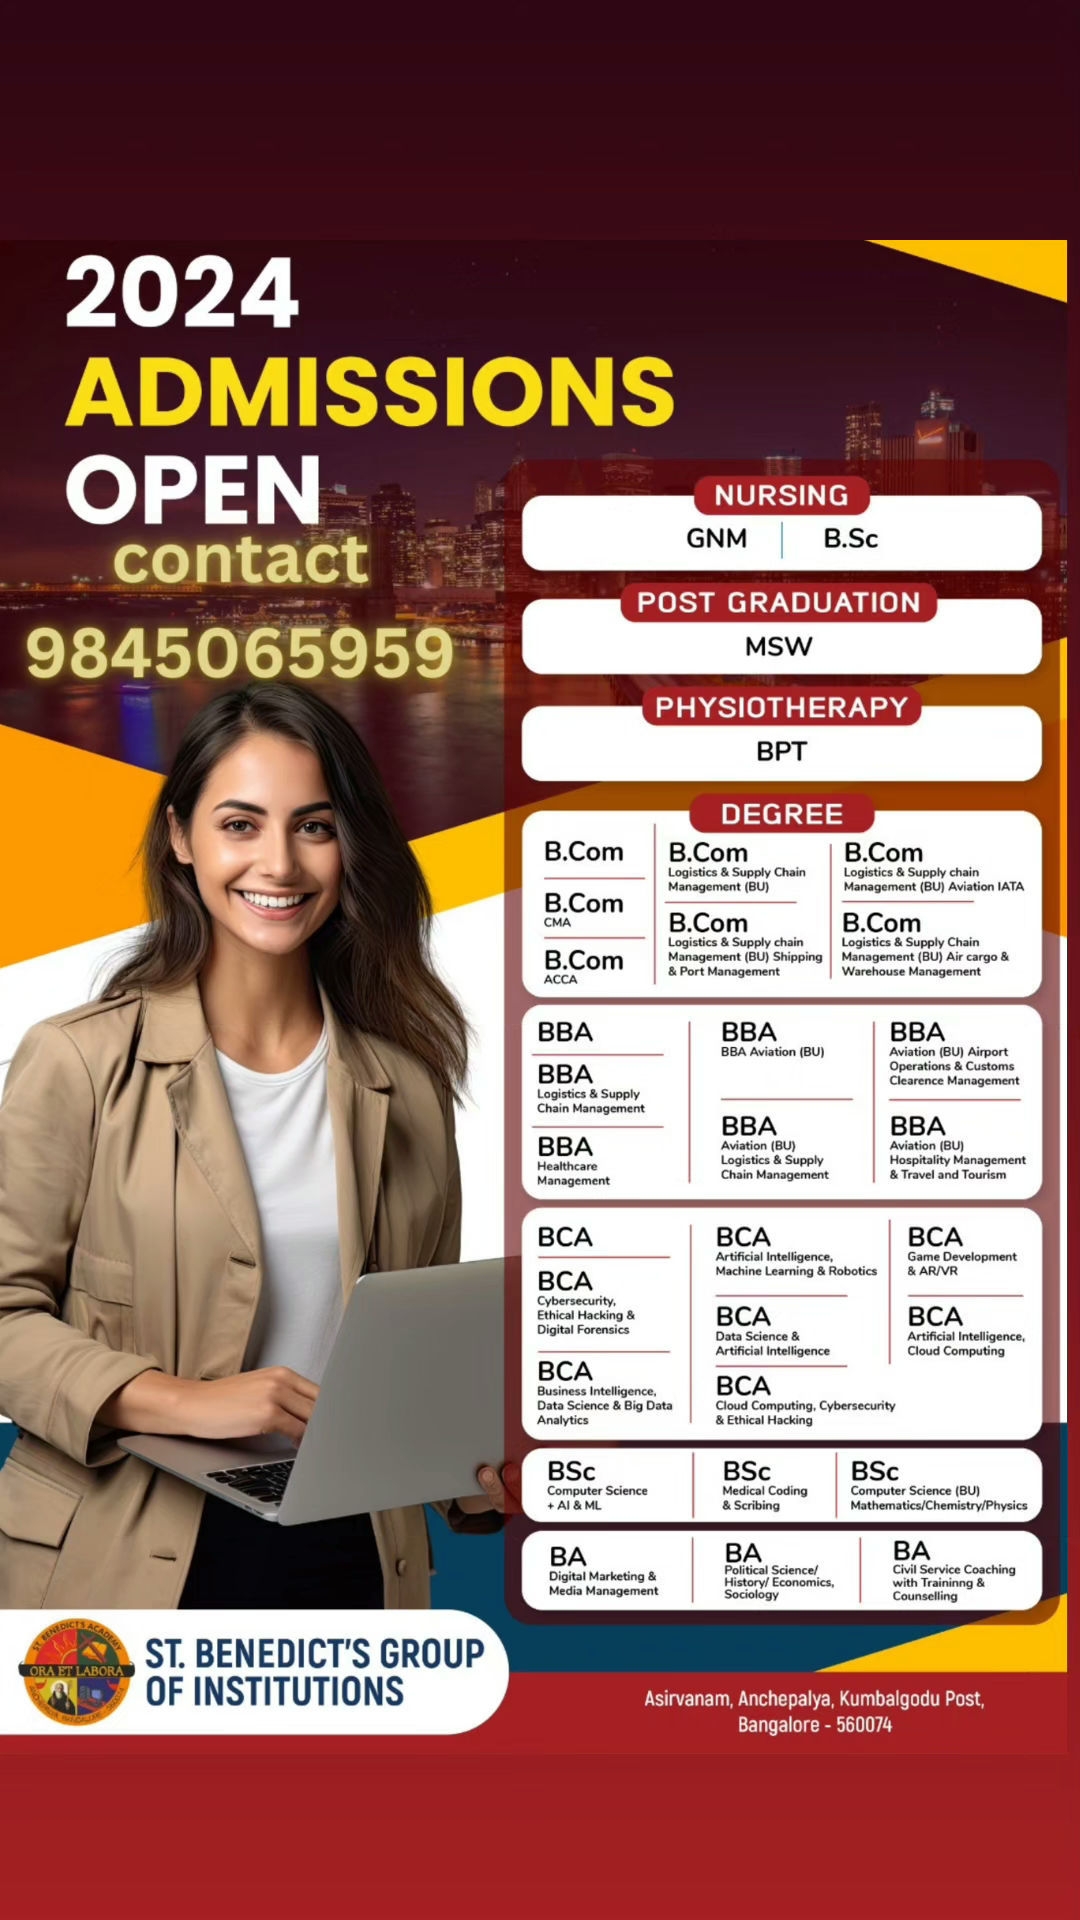 Admissions open @St. Benedicts Academy